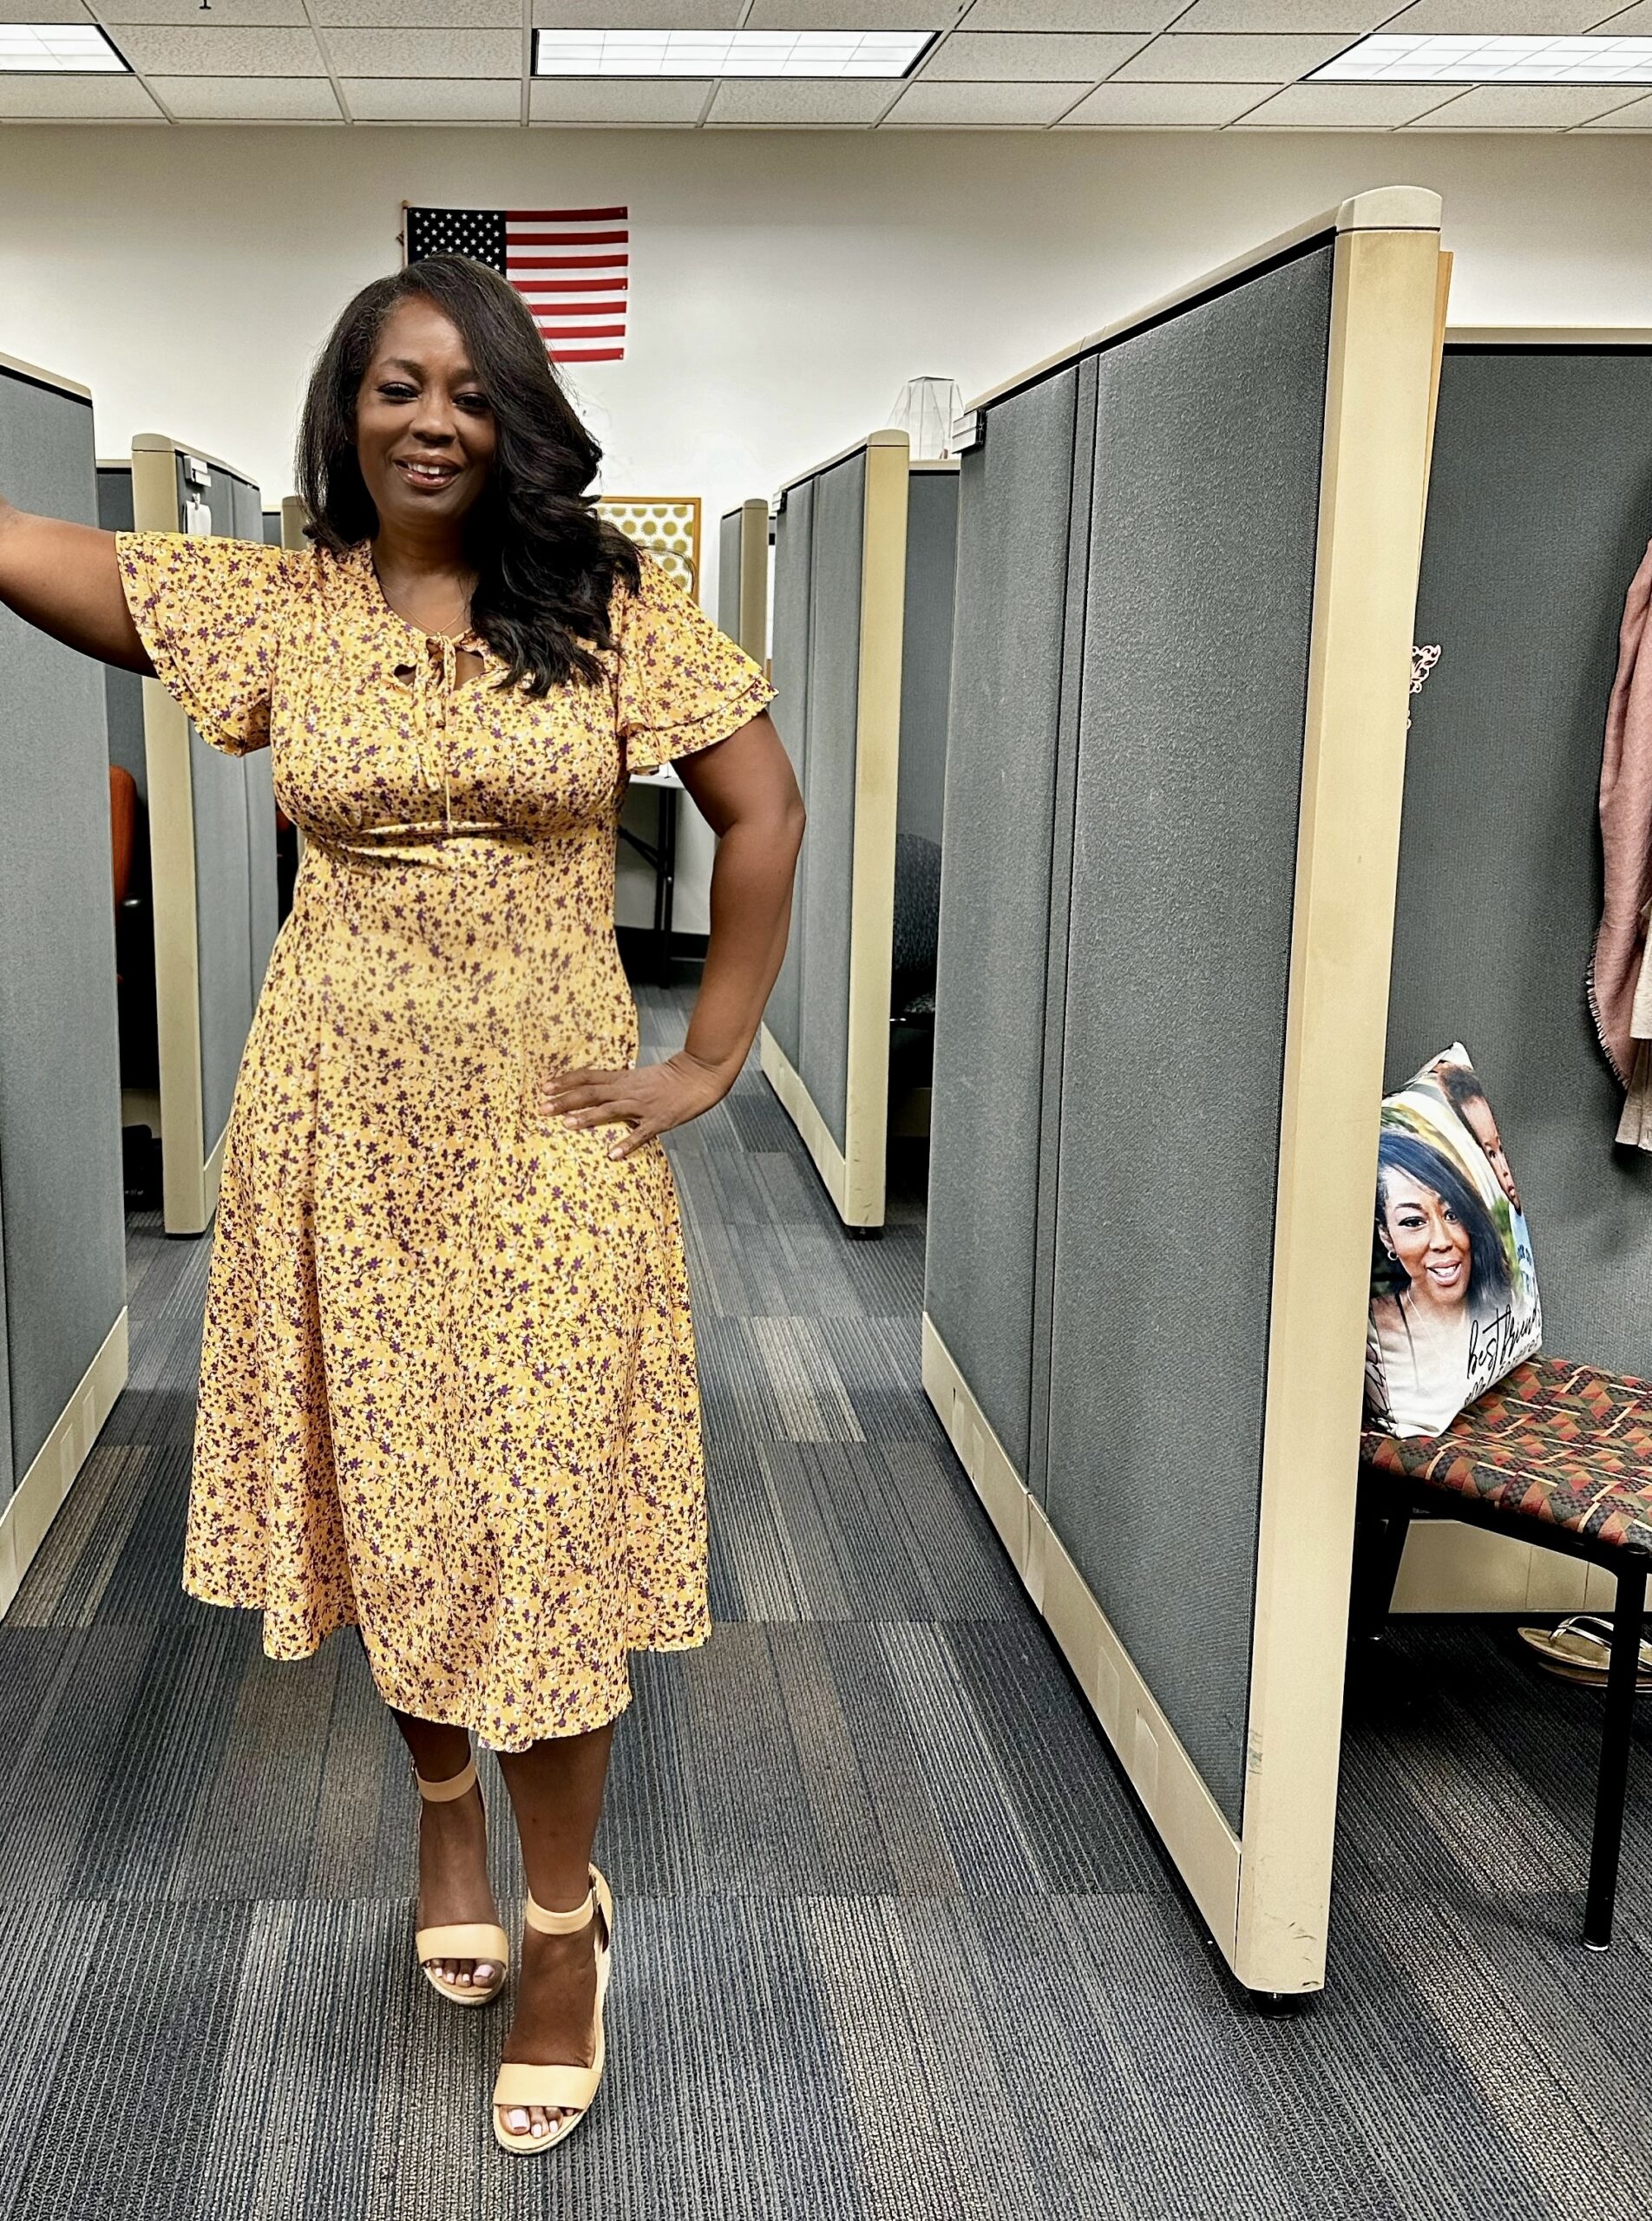 Styling A Floral Dress For Both Work And After-Hours